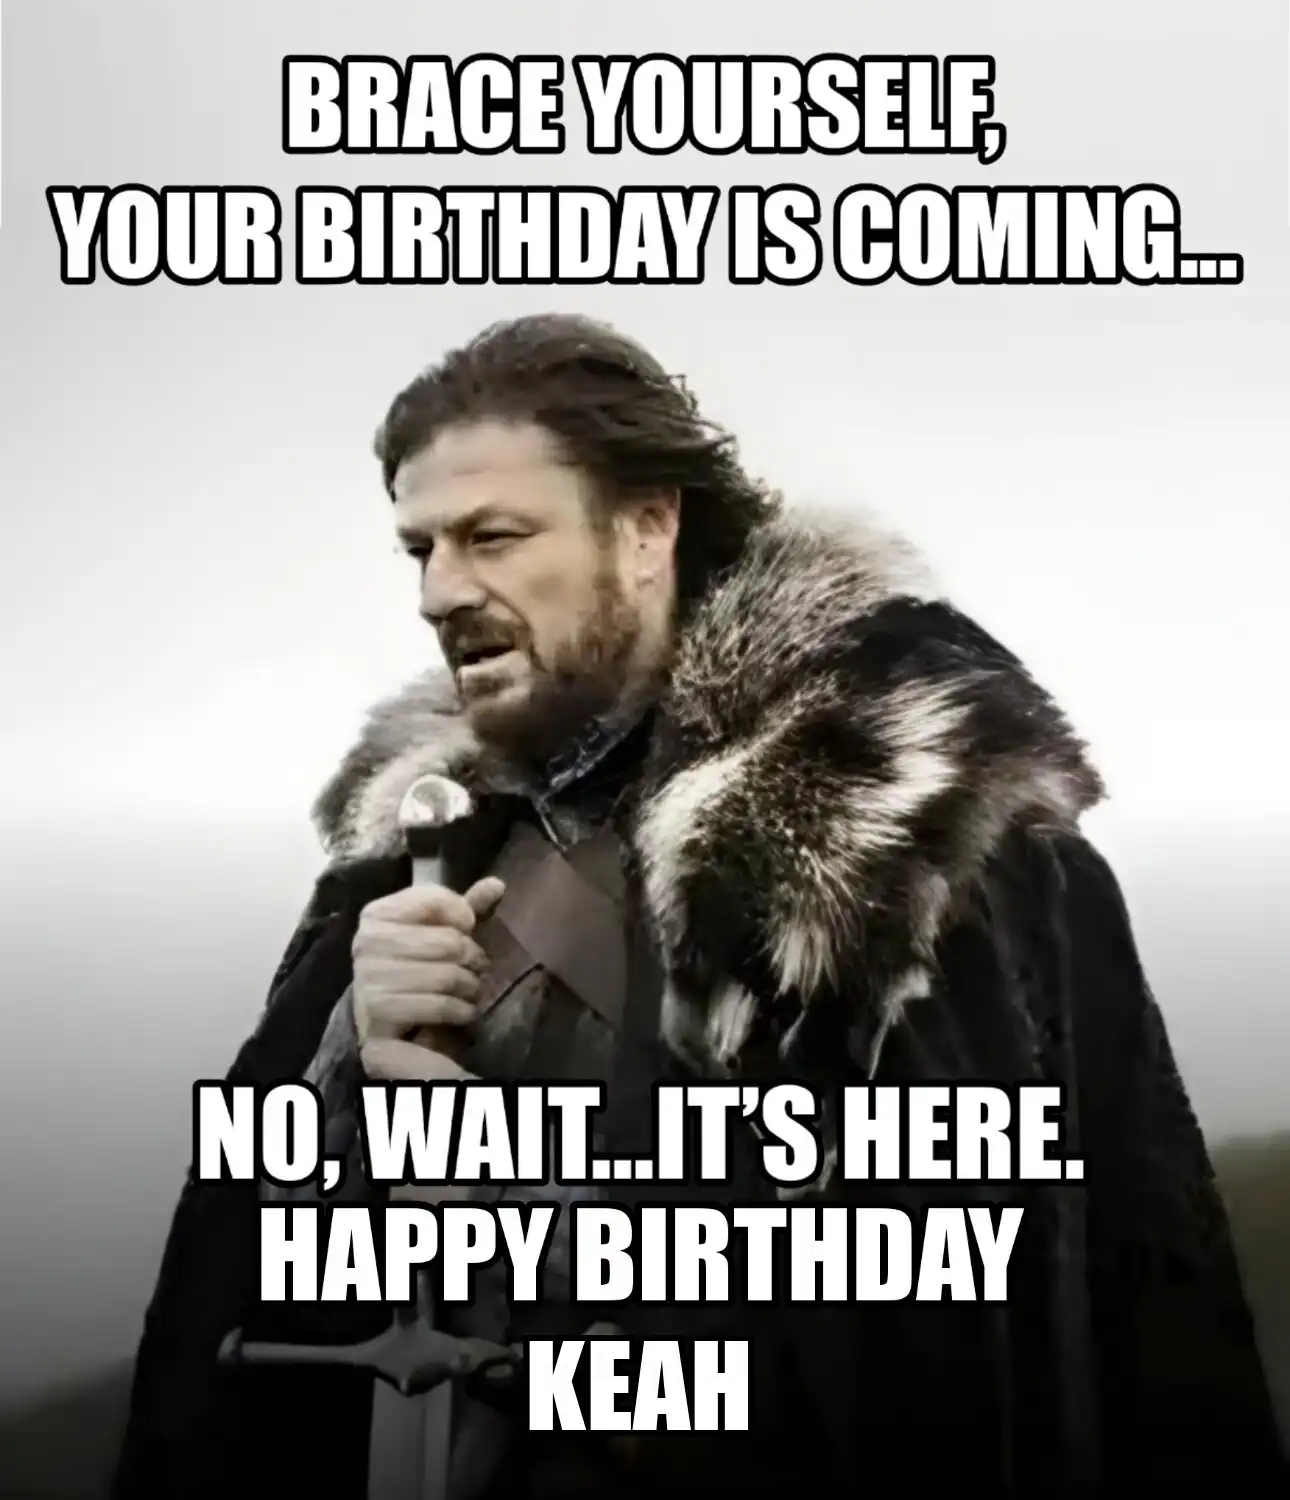 Happy Birthday Keah Brace Yourself Your Birthday Is Coming Meme